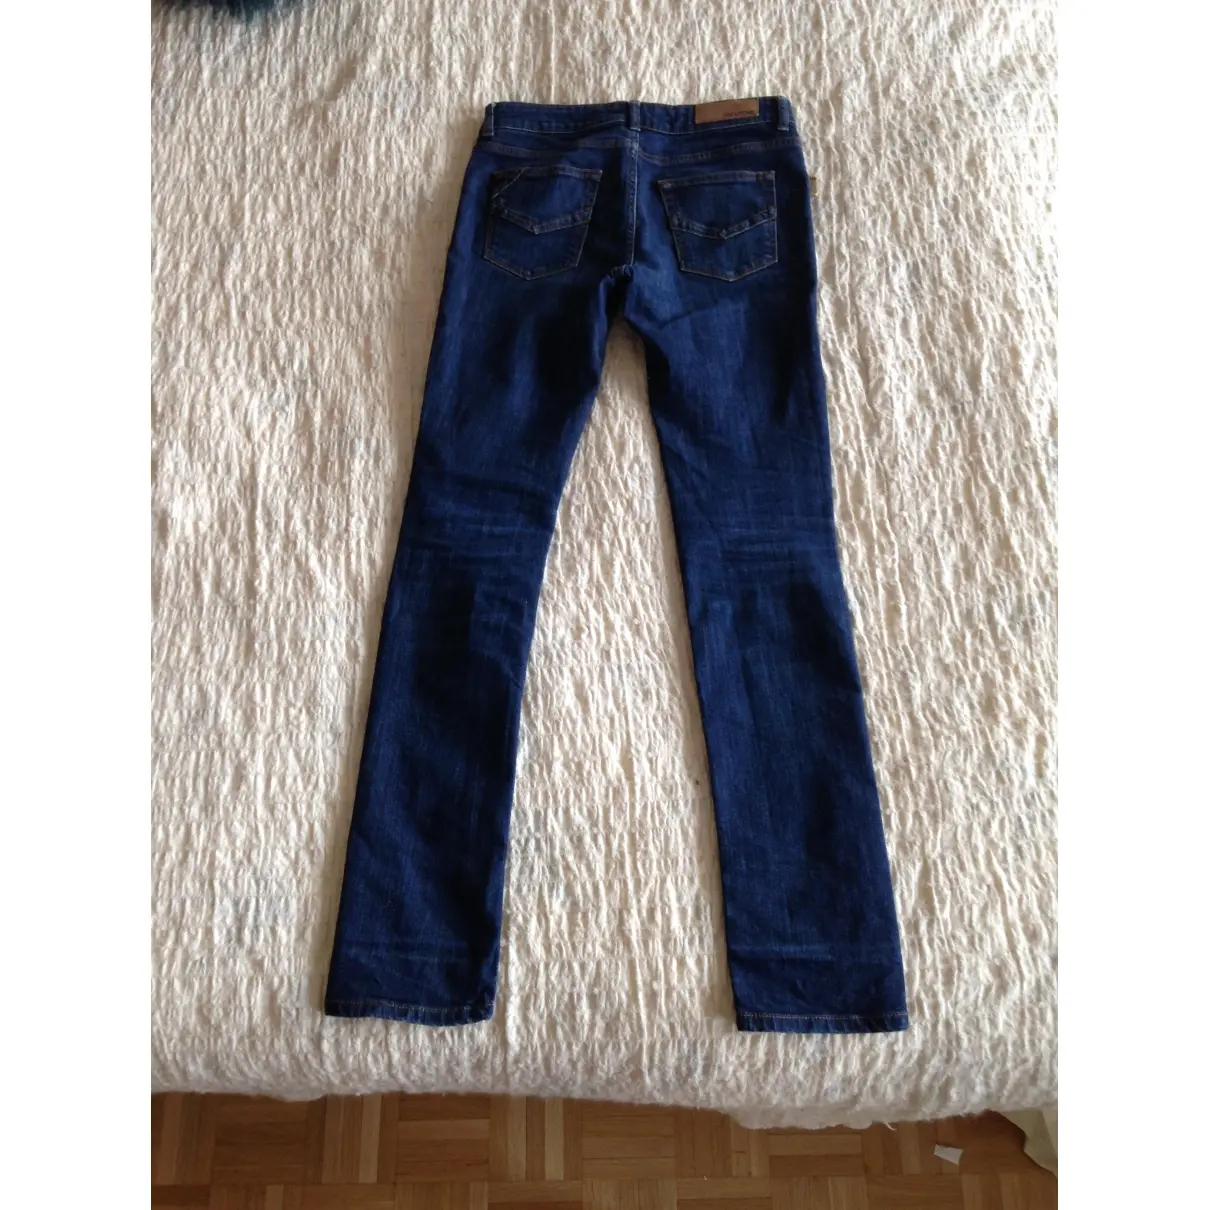 Zadig & Voltaire Straight jeans for sale